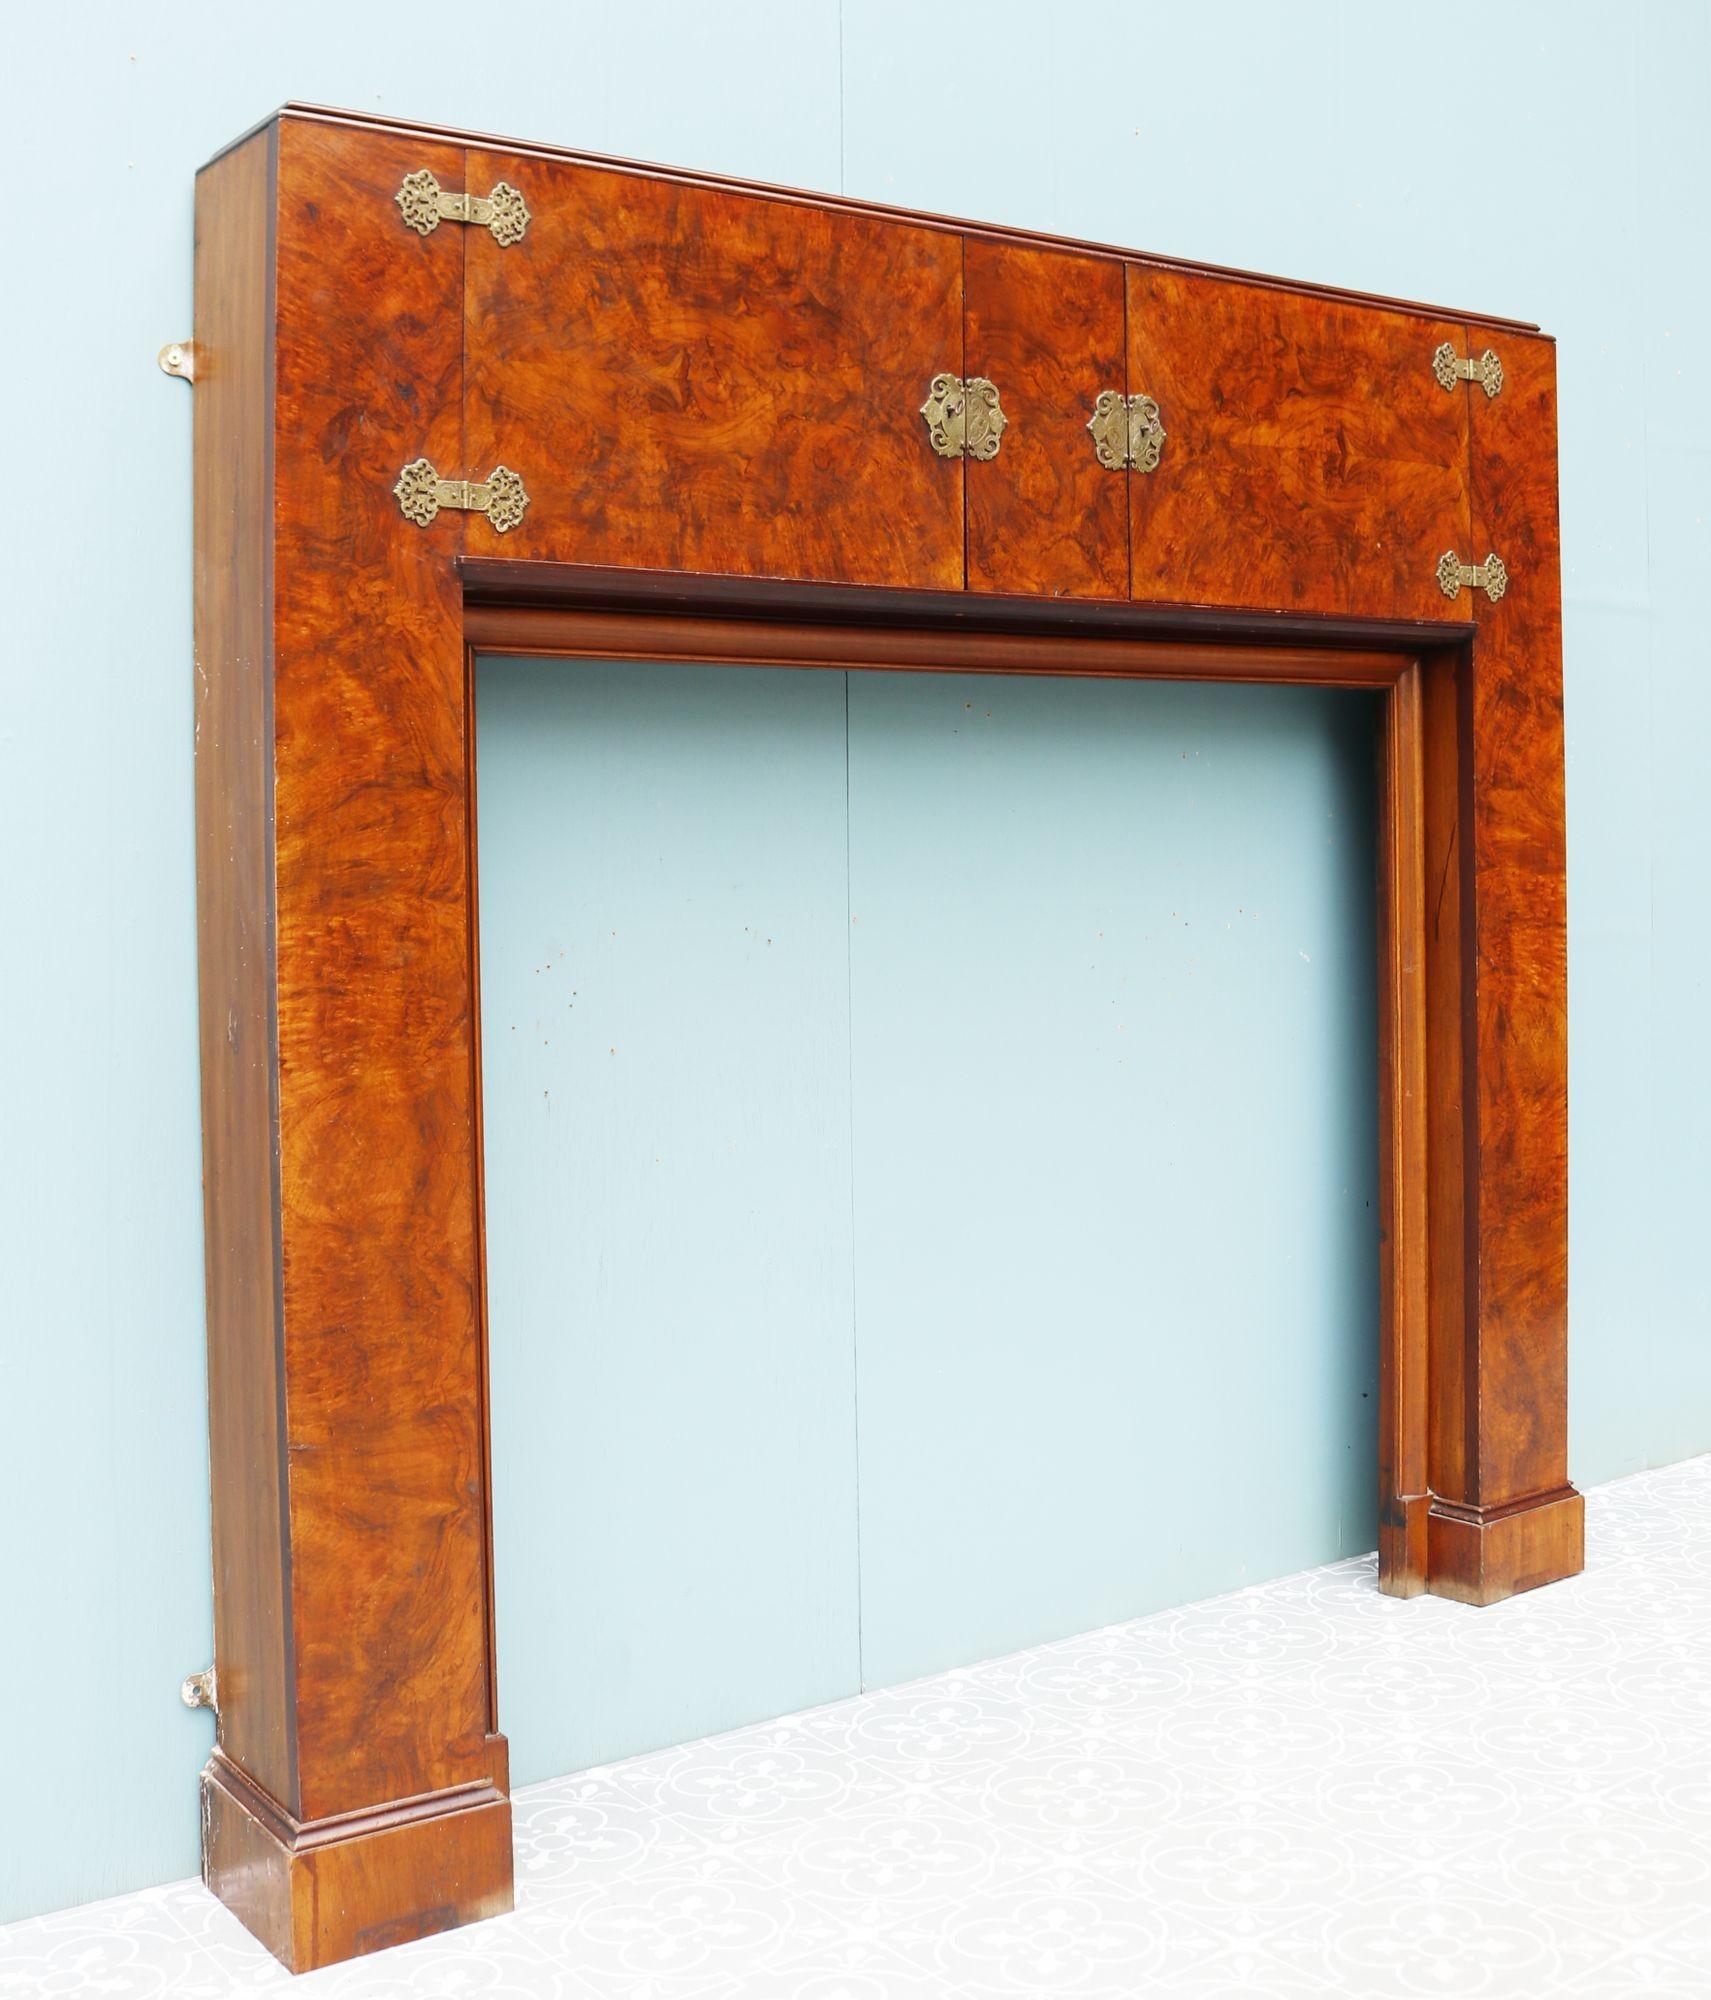 Art Deco style burr walnut fireplace. An Art Deco fire surround with mirrored cabinets and ornate brass fittings. The cabinet comes with two keys. The stye is typical of the early 20th century Art Deco movement with beautifully finished Walnut.
